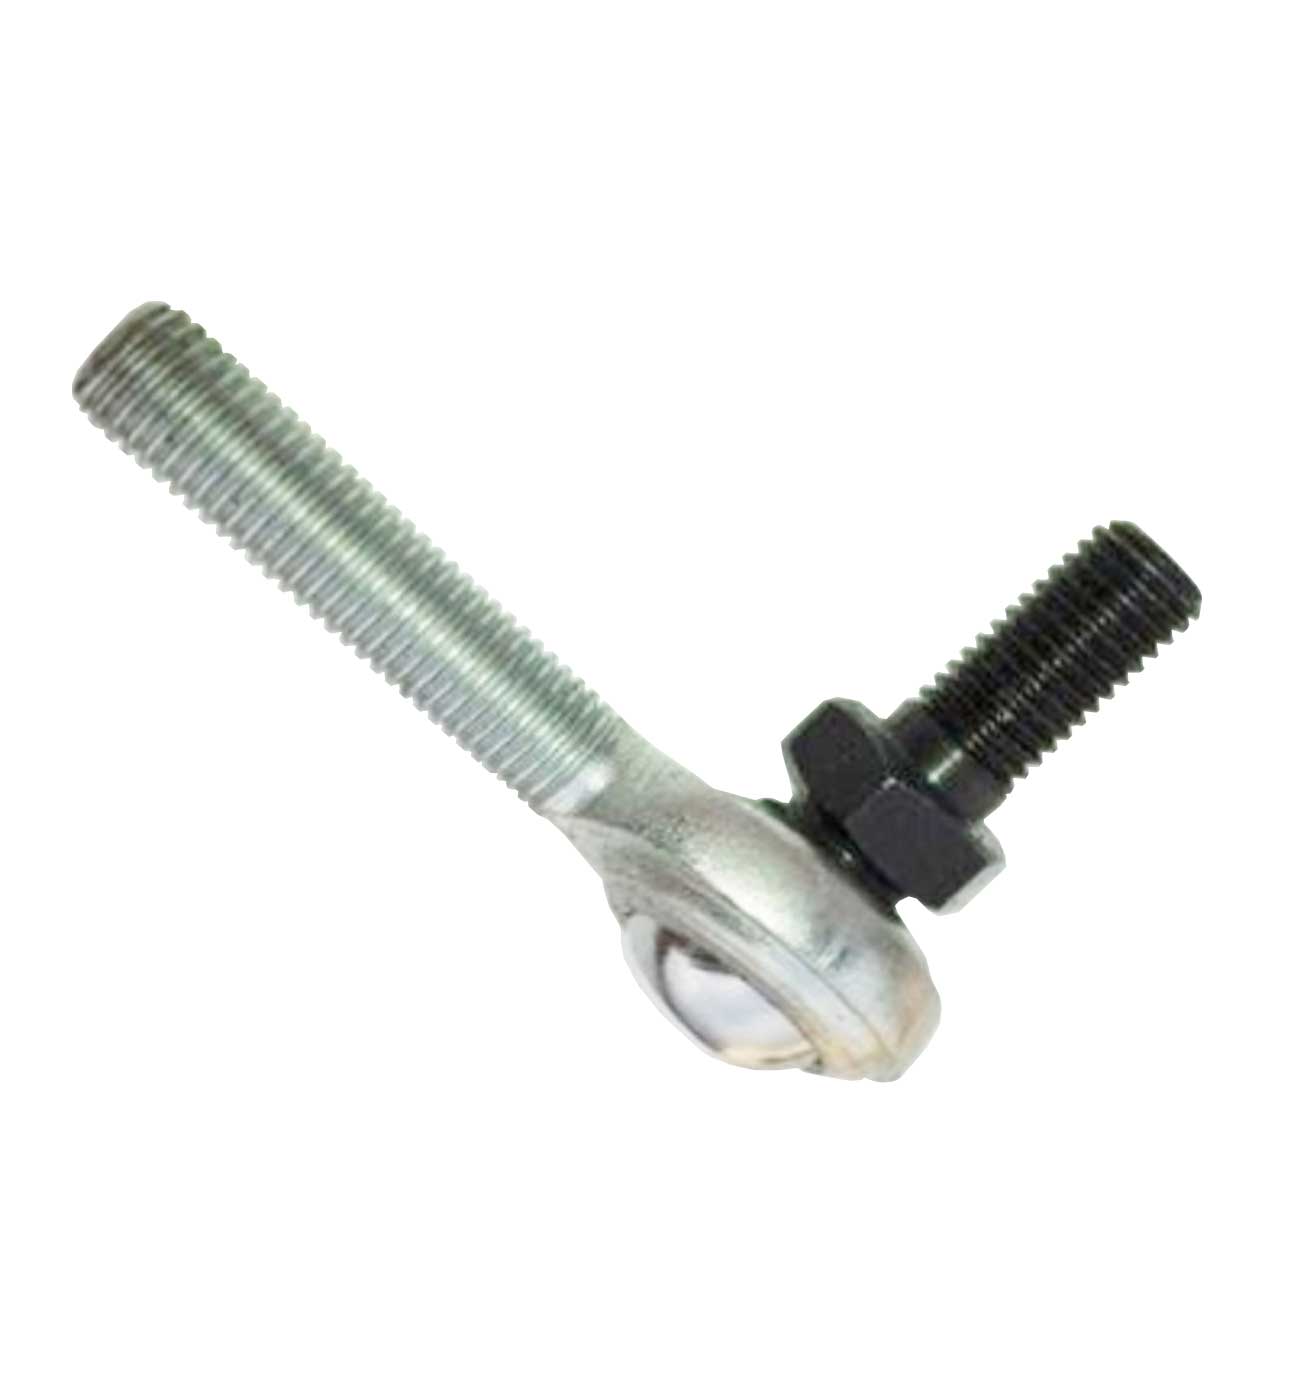 5/16 x 5/16" Male-Male Studded Rod End Joint Left Hand Thread (CML5S)